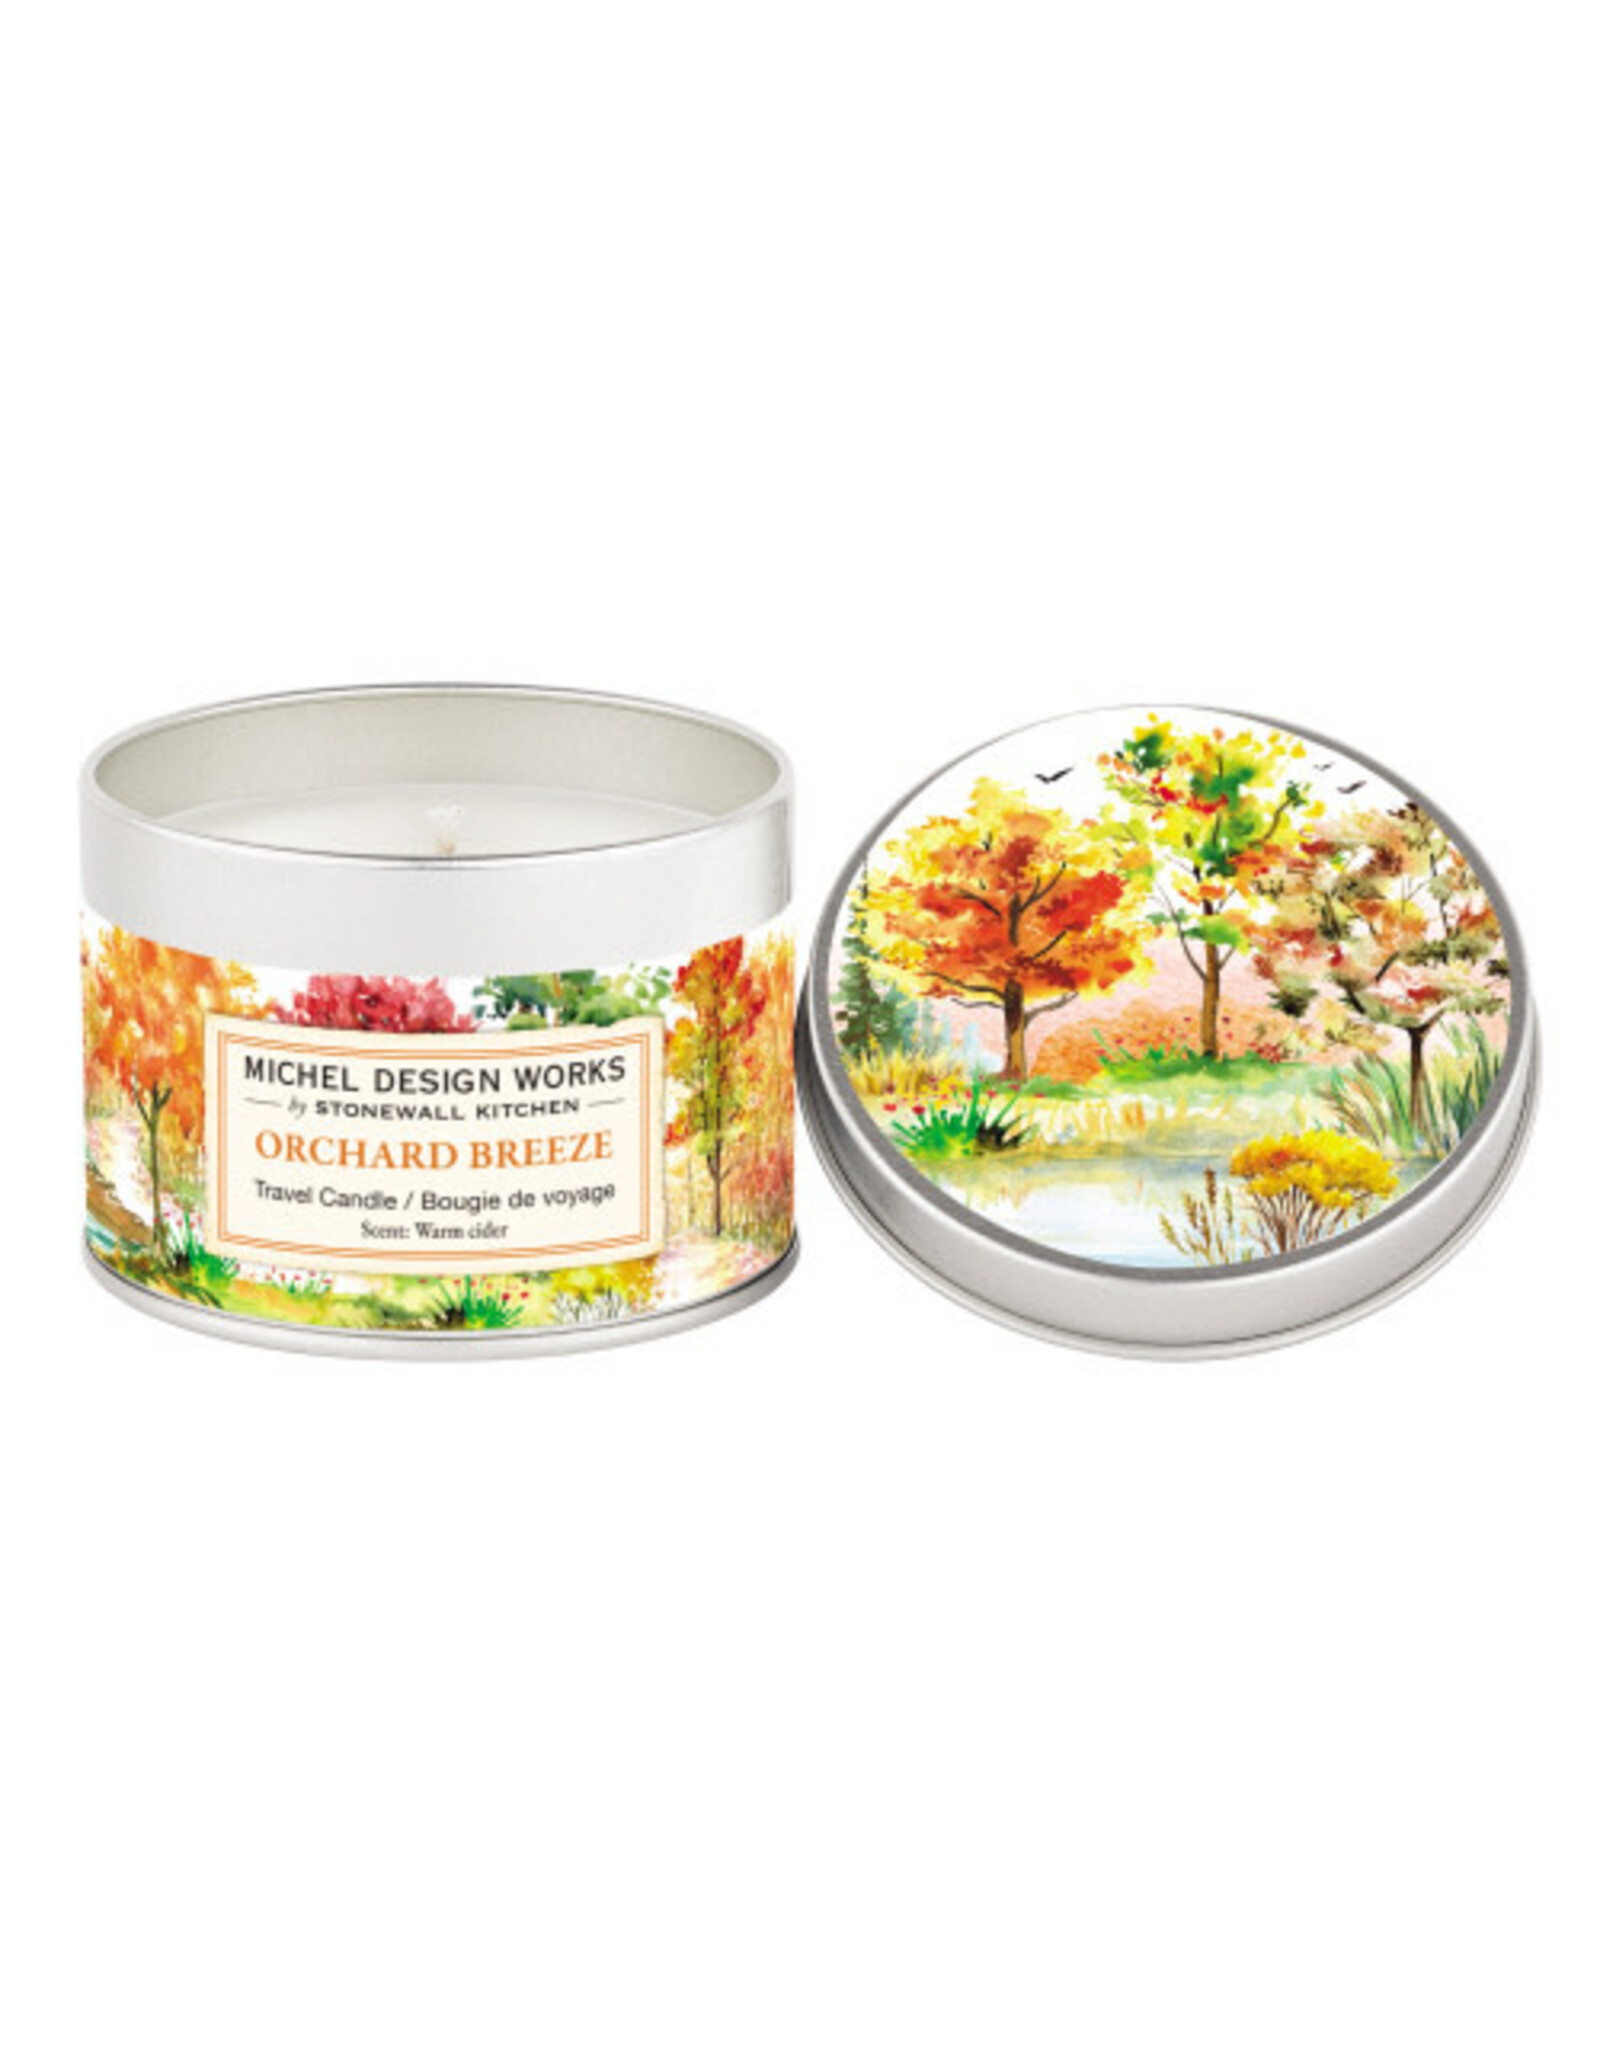 Michel Design Orchard Breeze Travel Candle